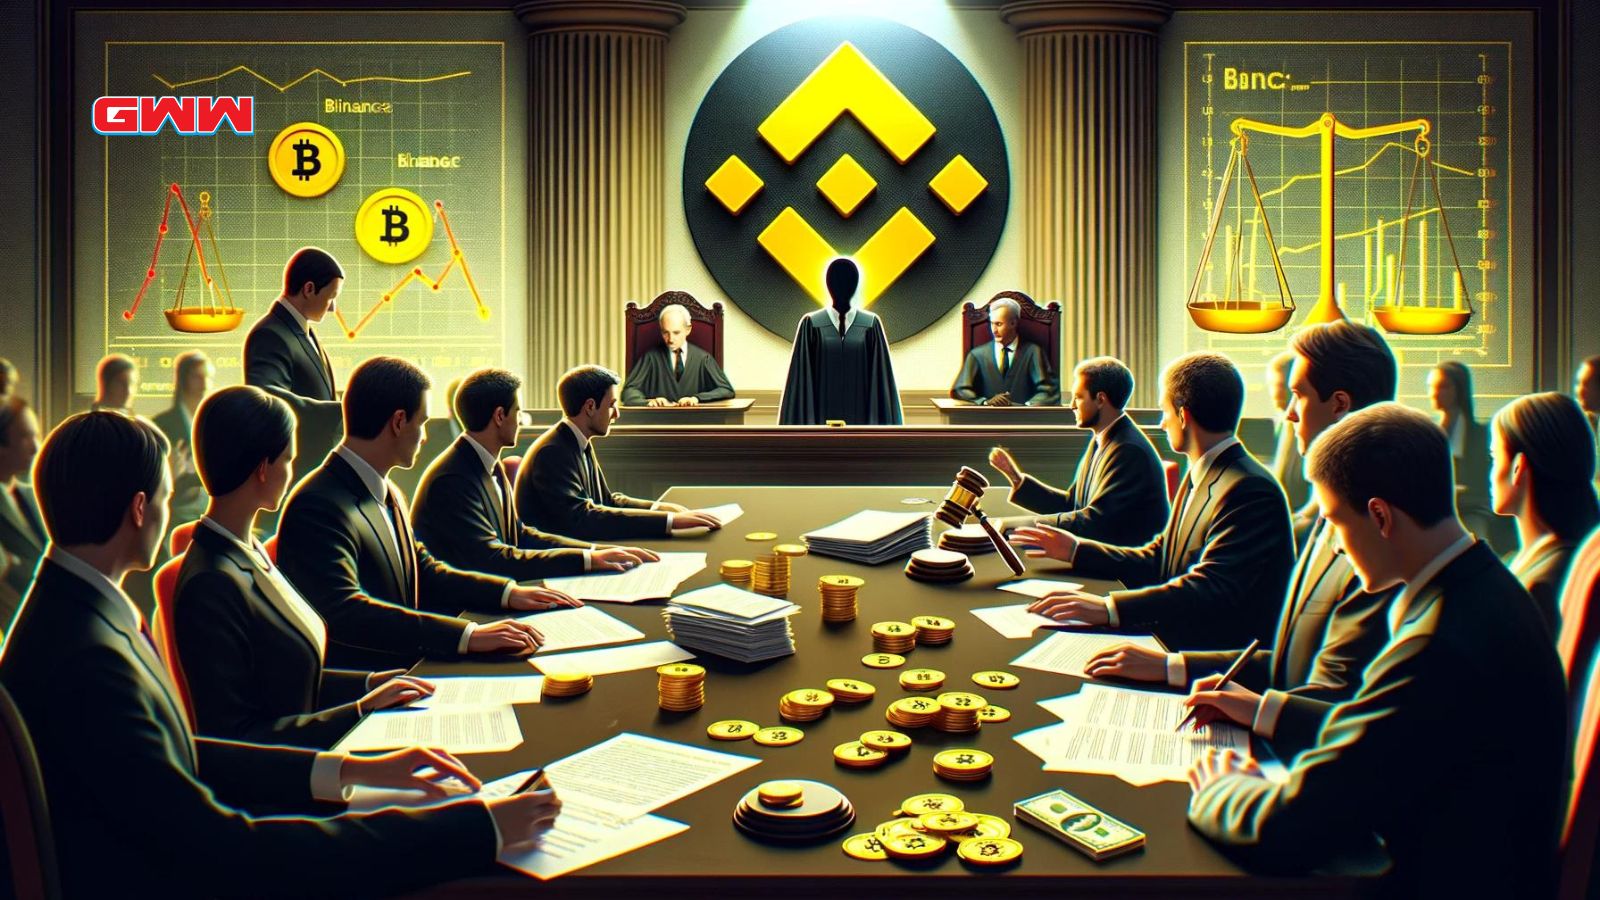 Binance logo in courtroom, legal professionals, and Bitcoin symbols on screens